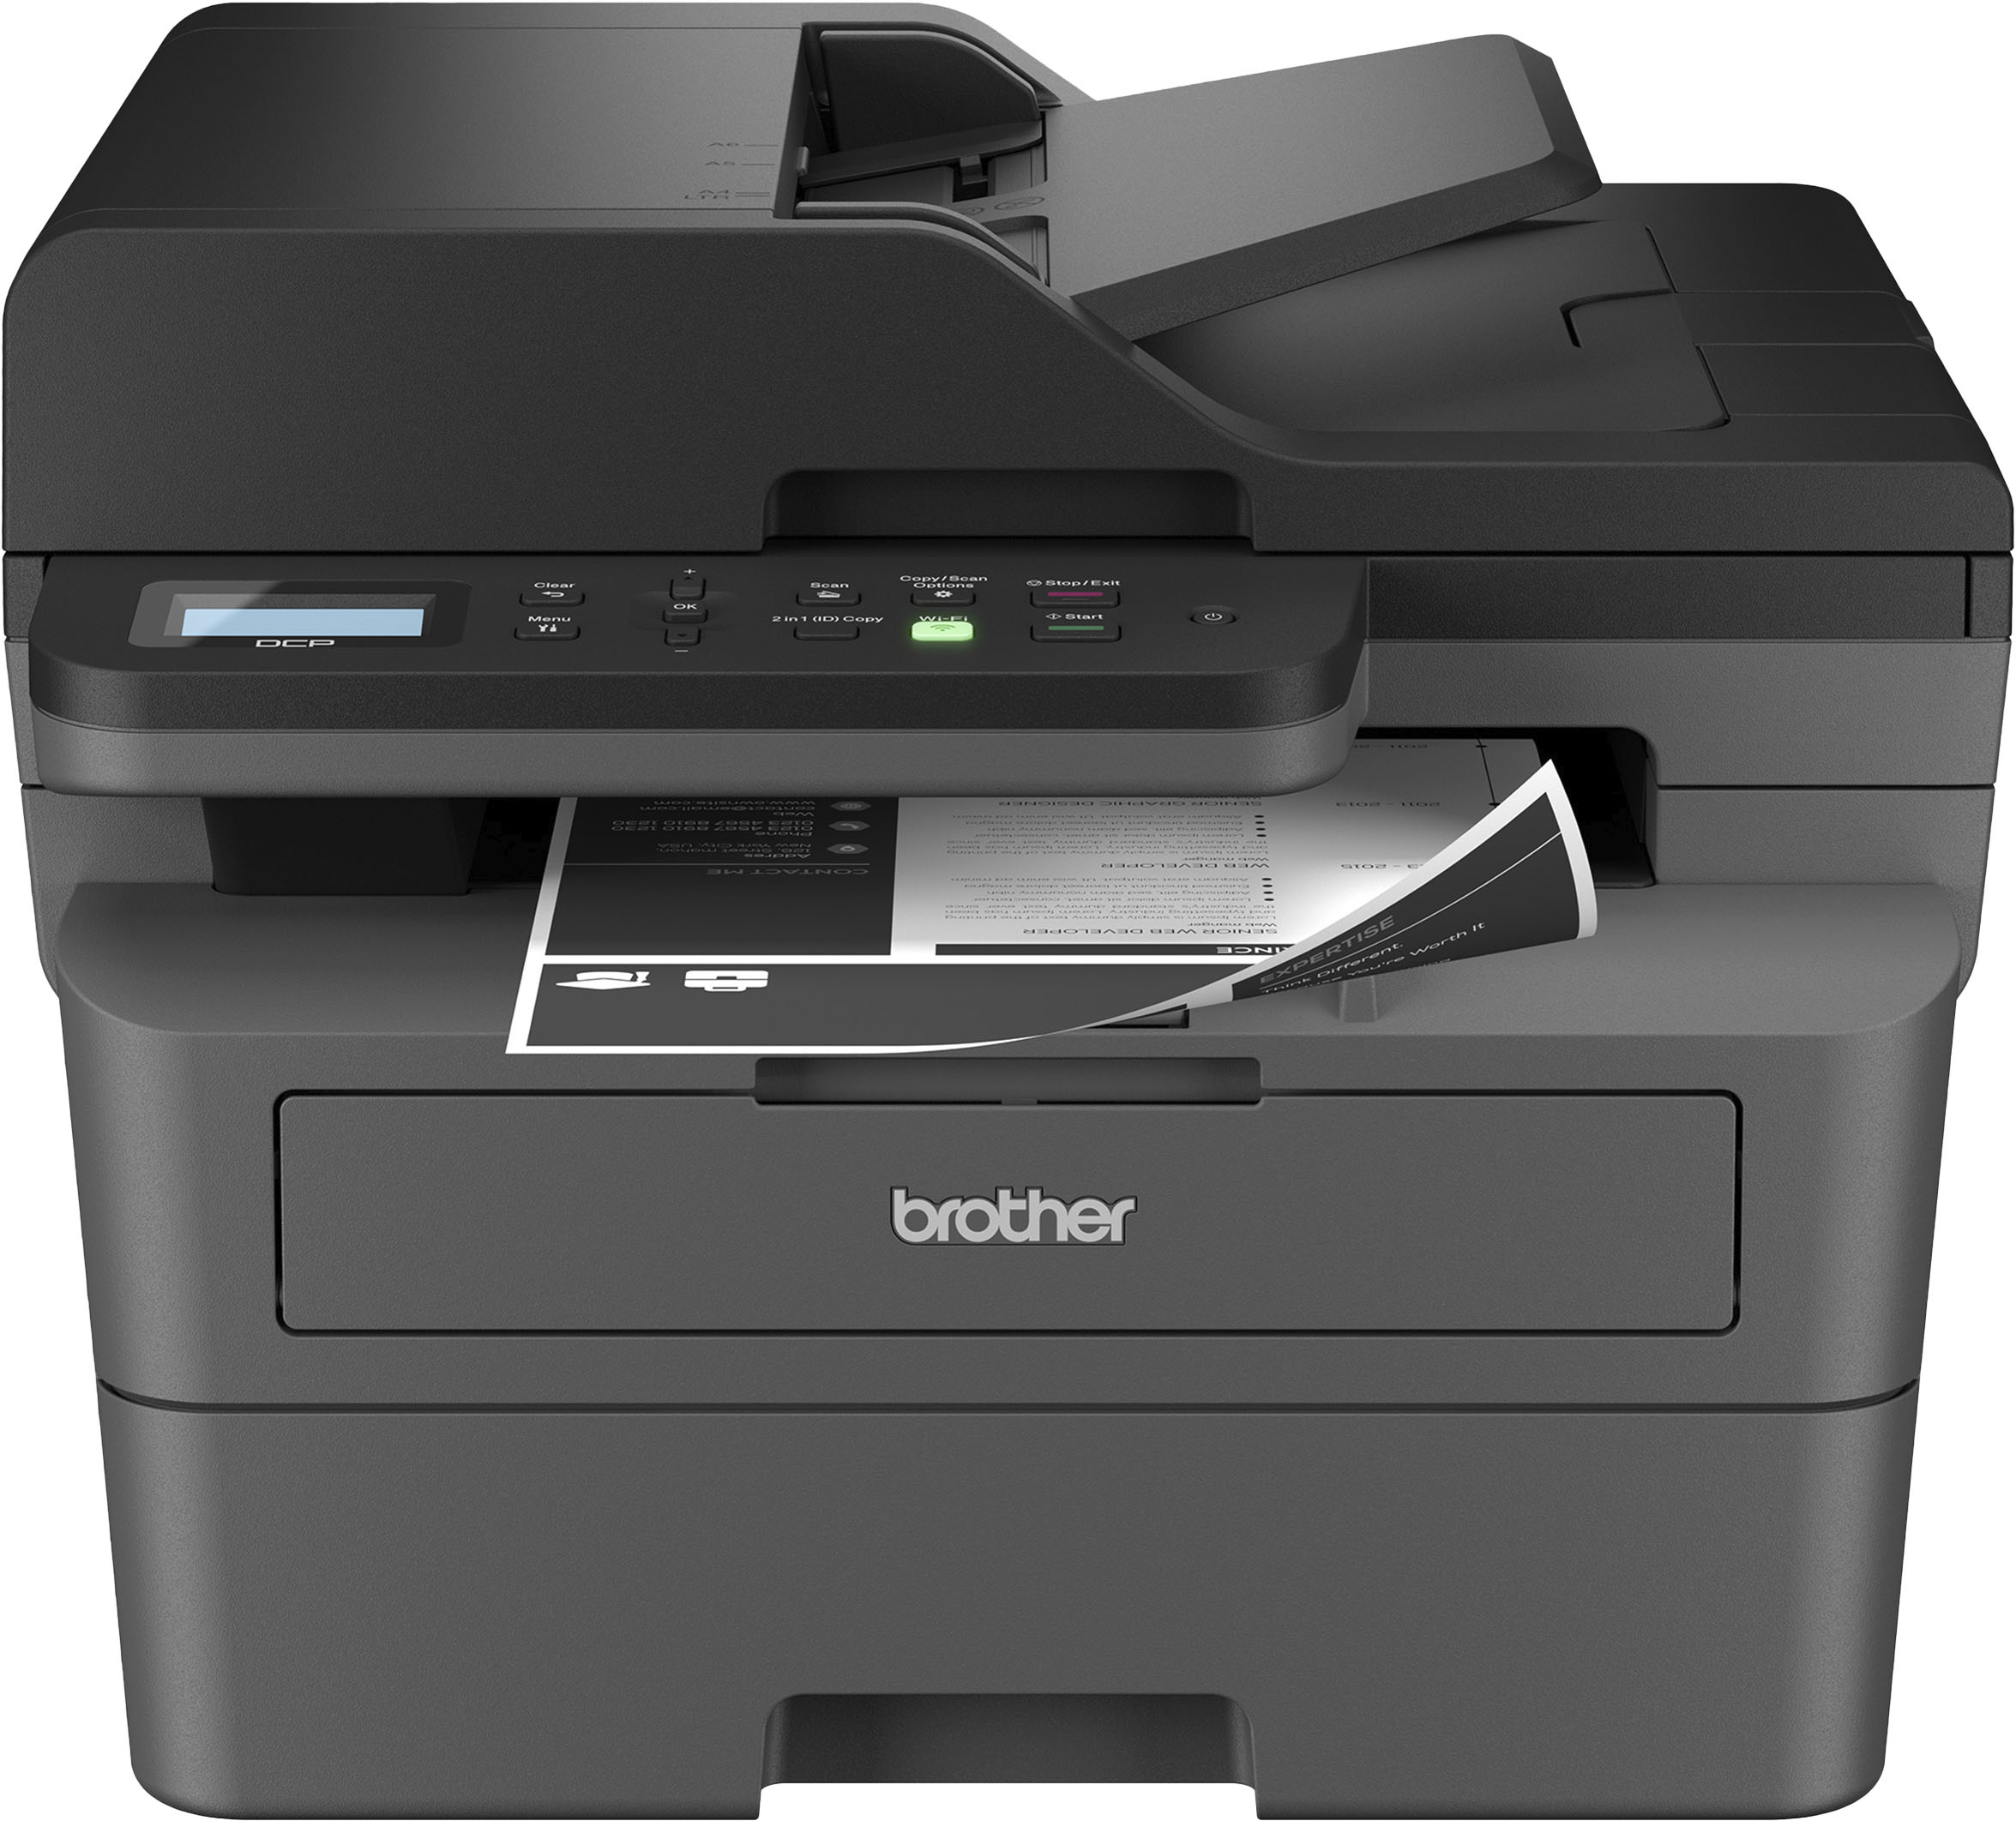 Brother MFC-L2710DW All-in-One Monochrome Laser Printer (MFC-L2710DW) -  Bundle 